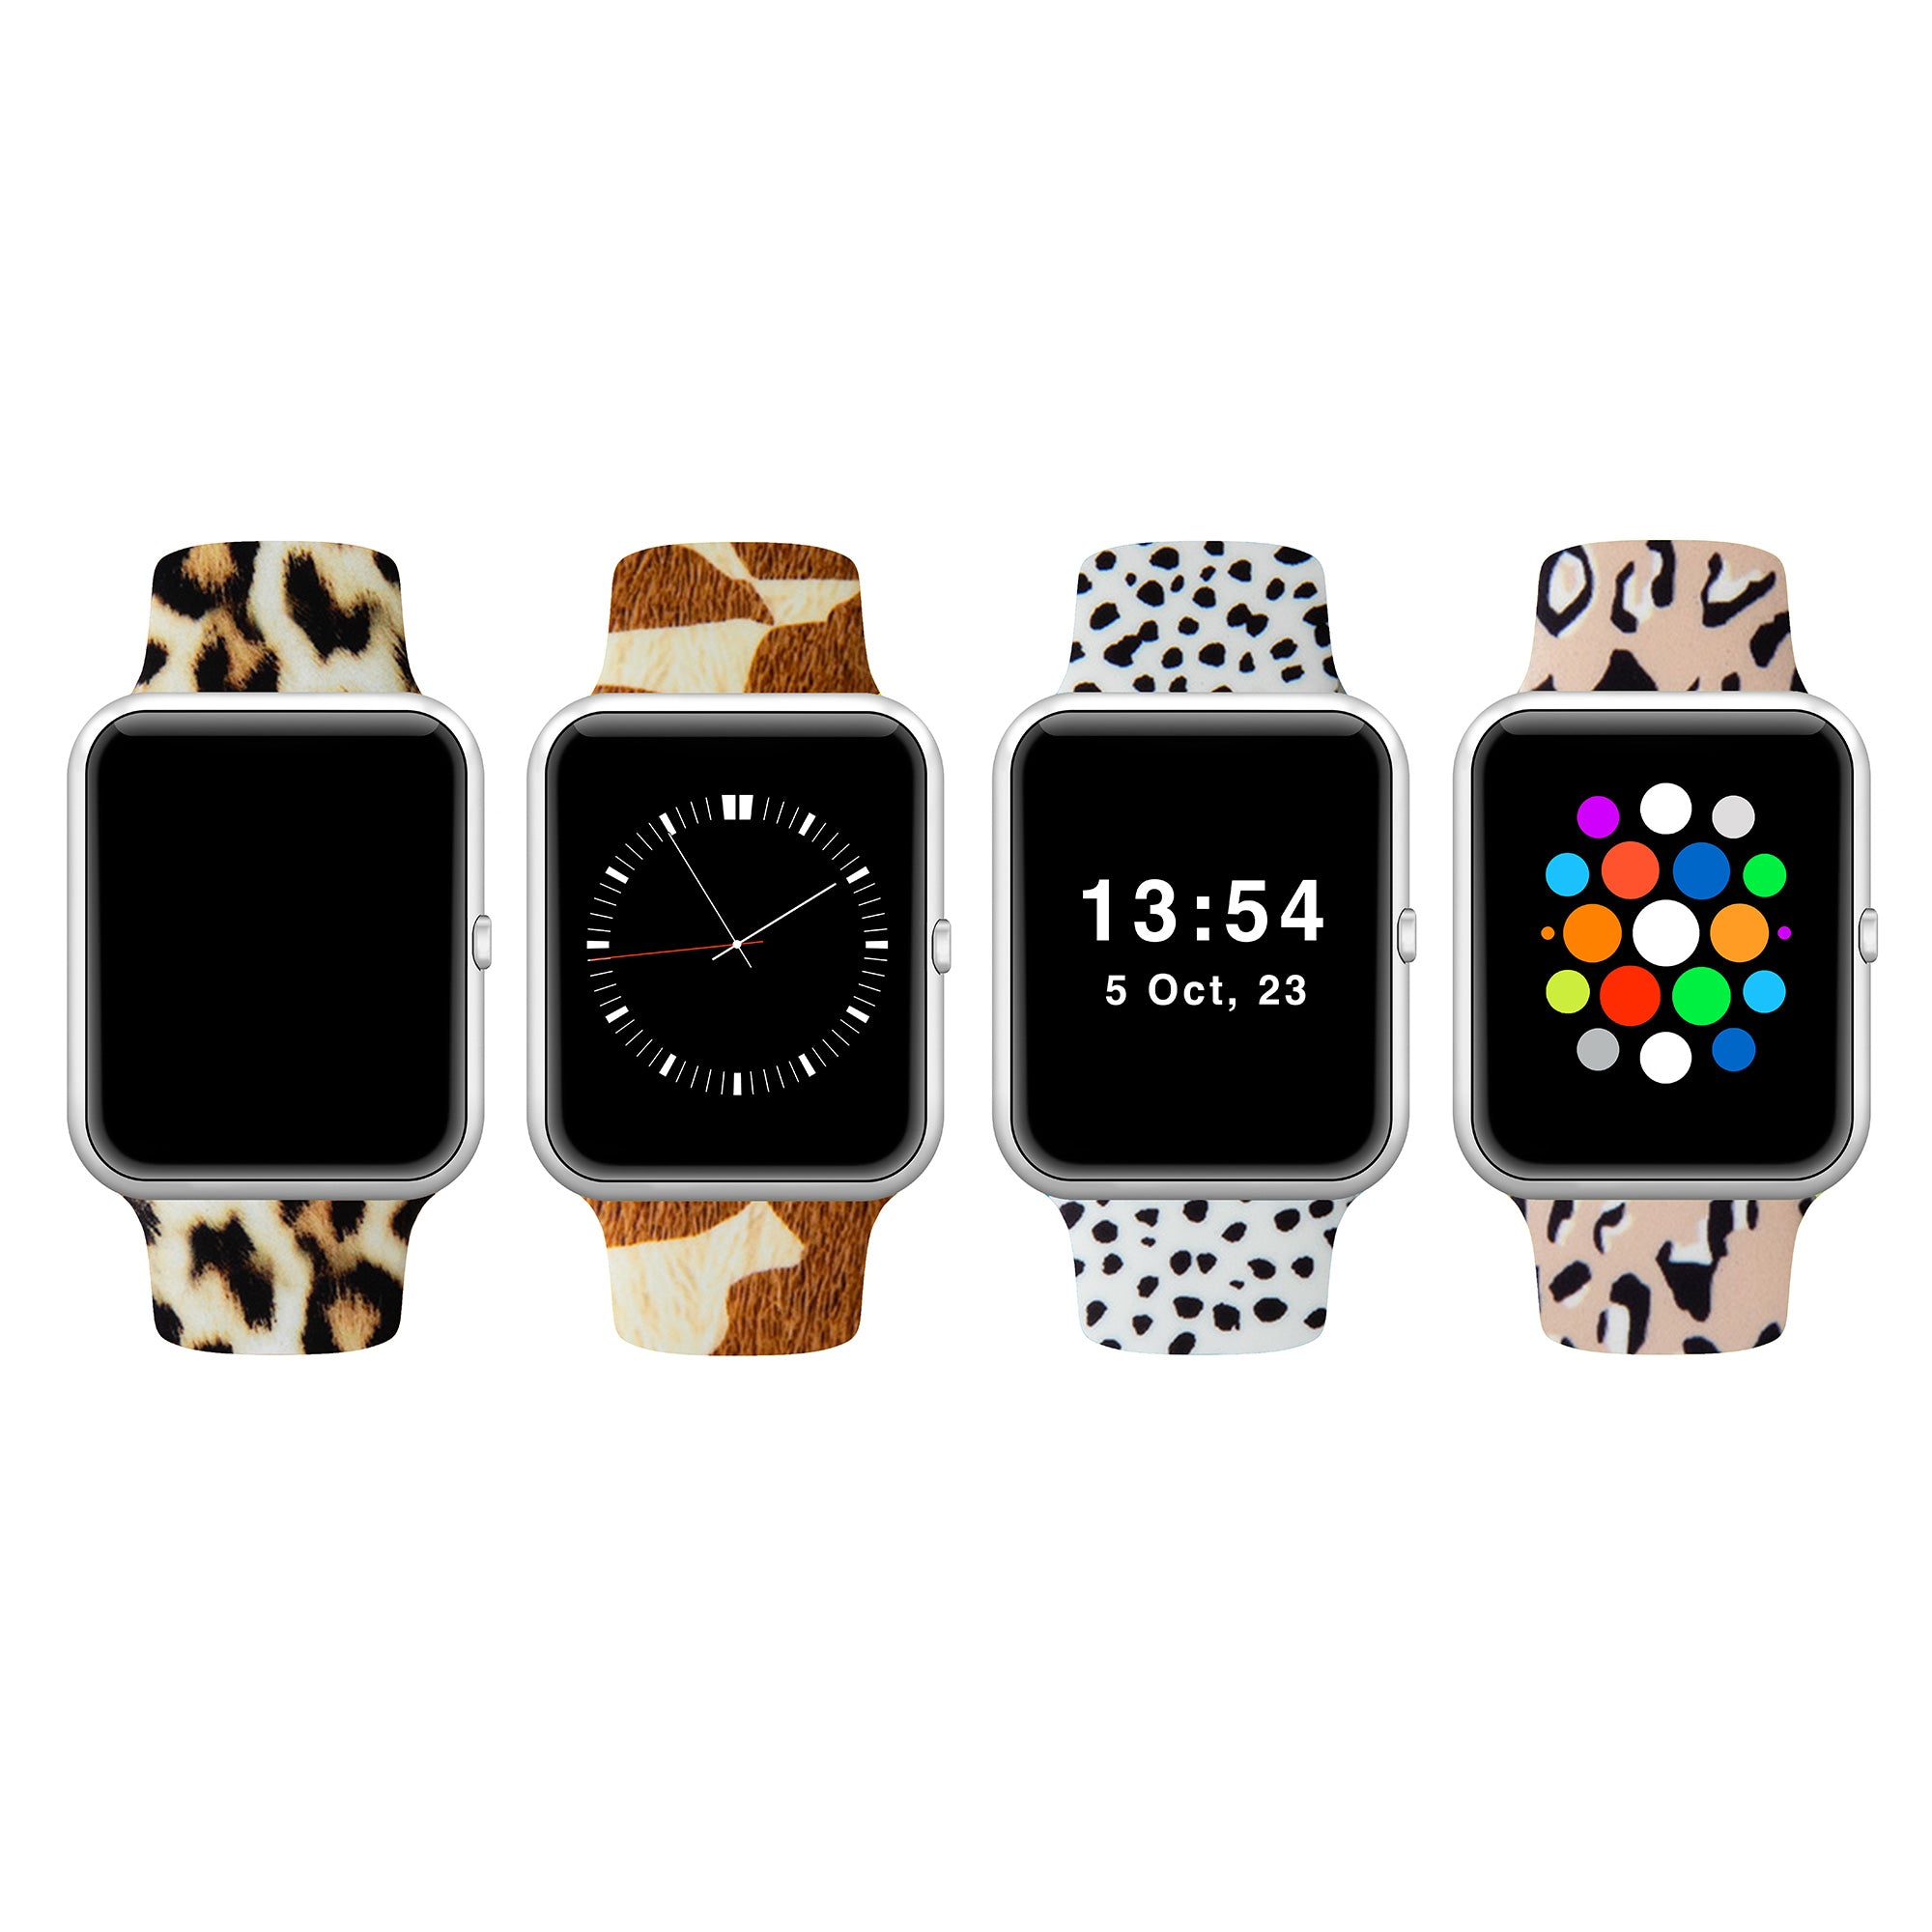 Patterned Silicone Apple Watch Band 38mm/40mm 42mm/44mm - Black & White Buffalo Plaid - 42mm/44mm